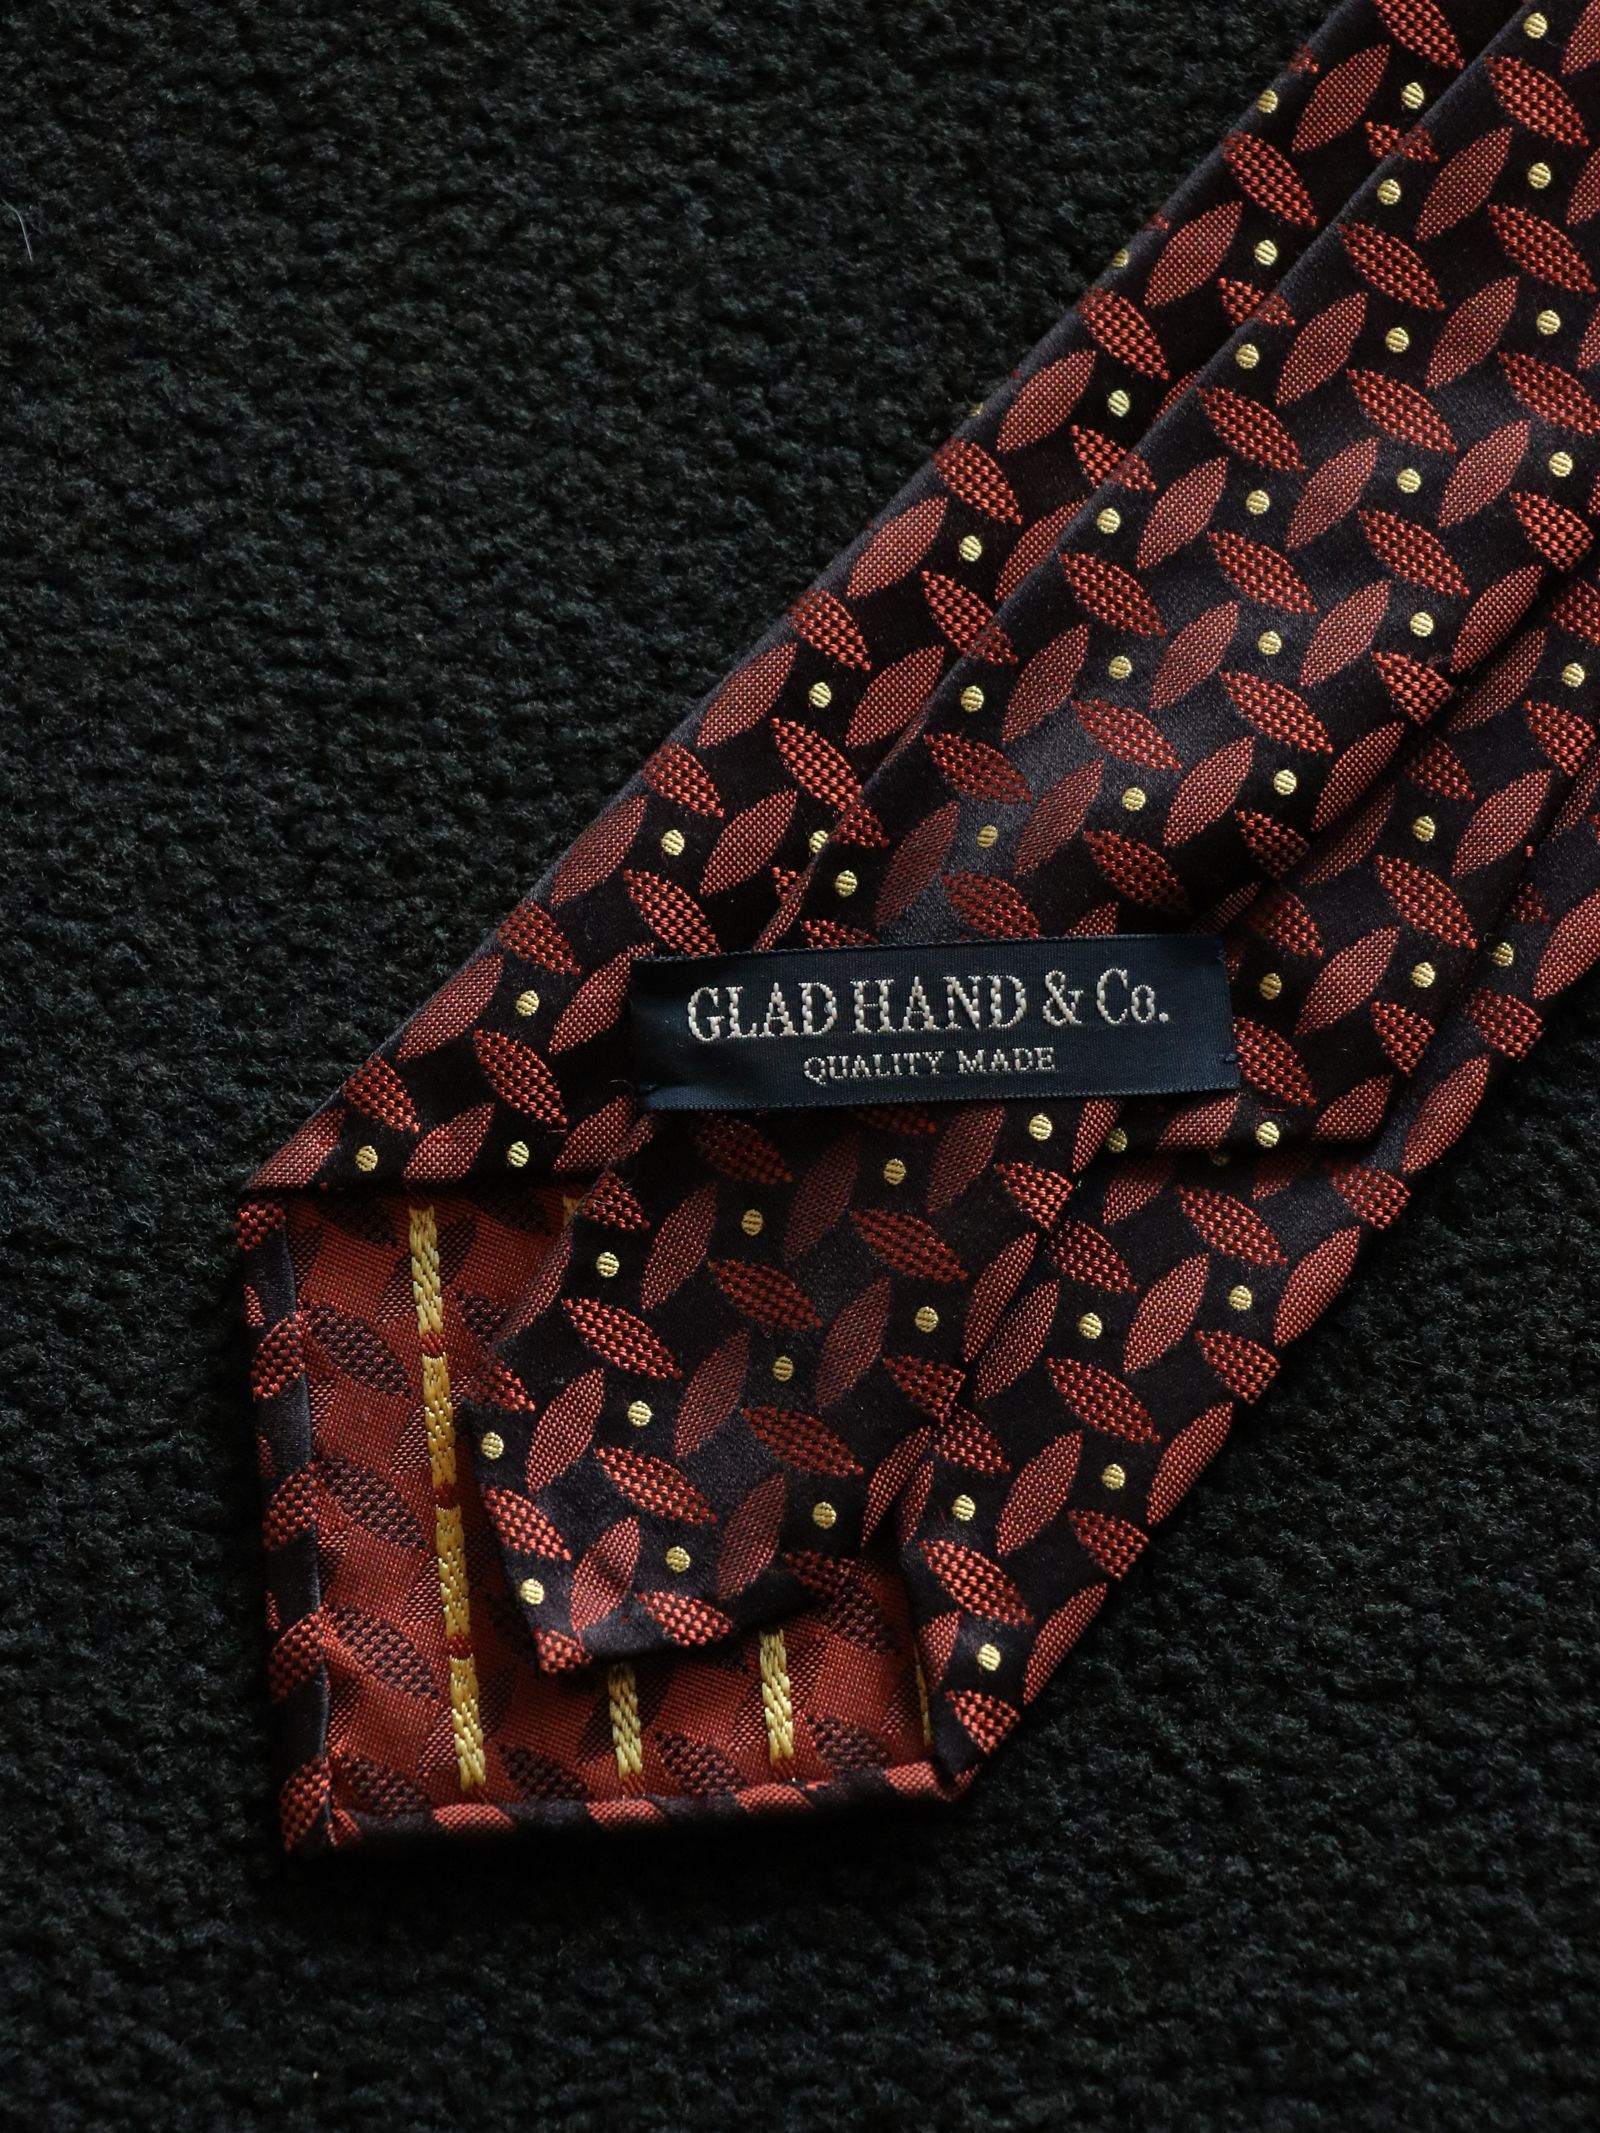 GLAD HAND & Co. - Tailored Peru Four In Hand Tie (Brown 